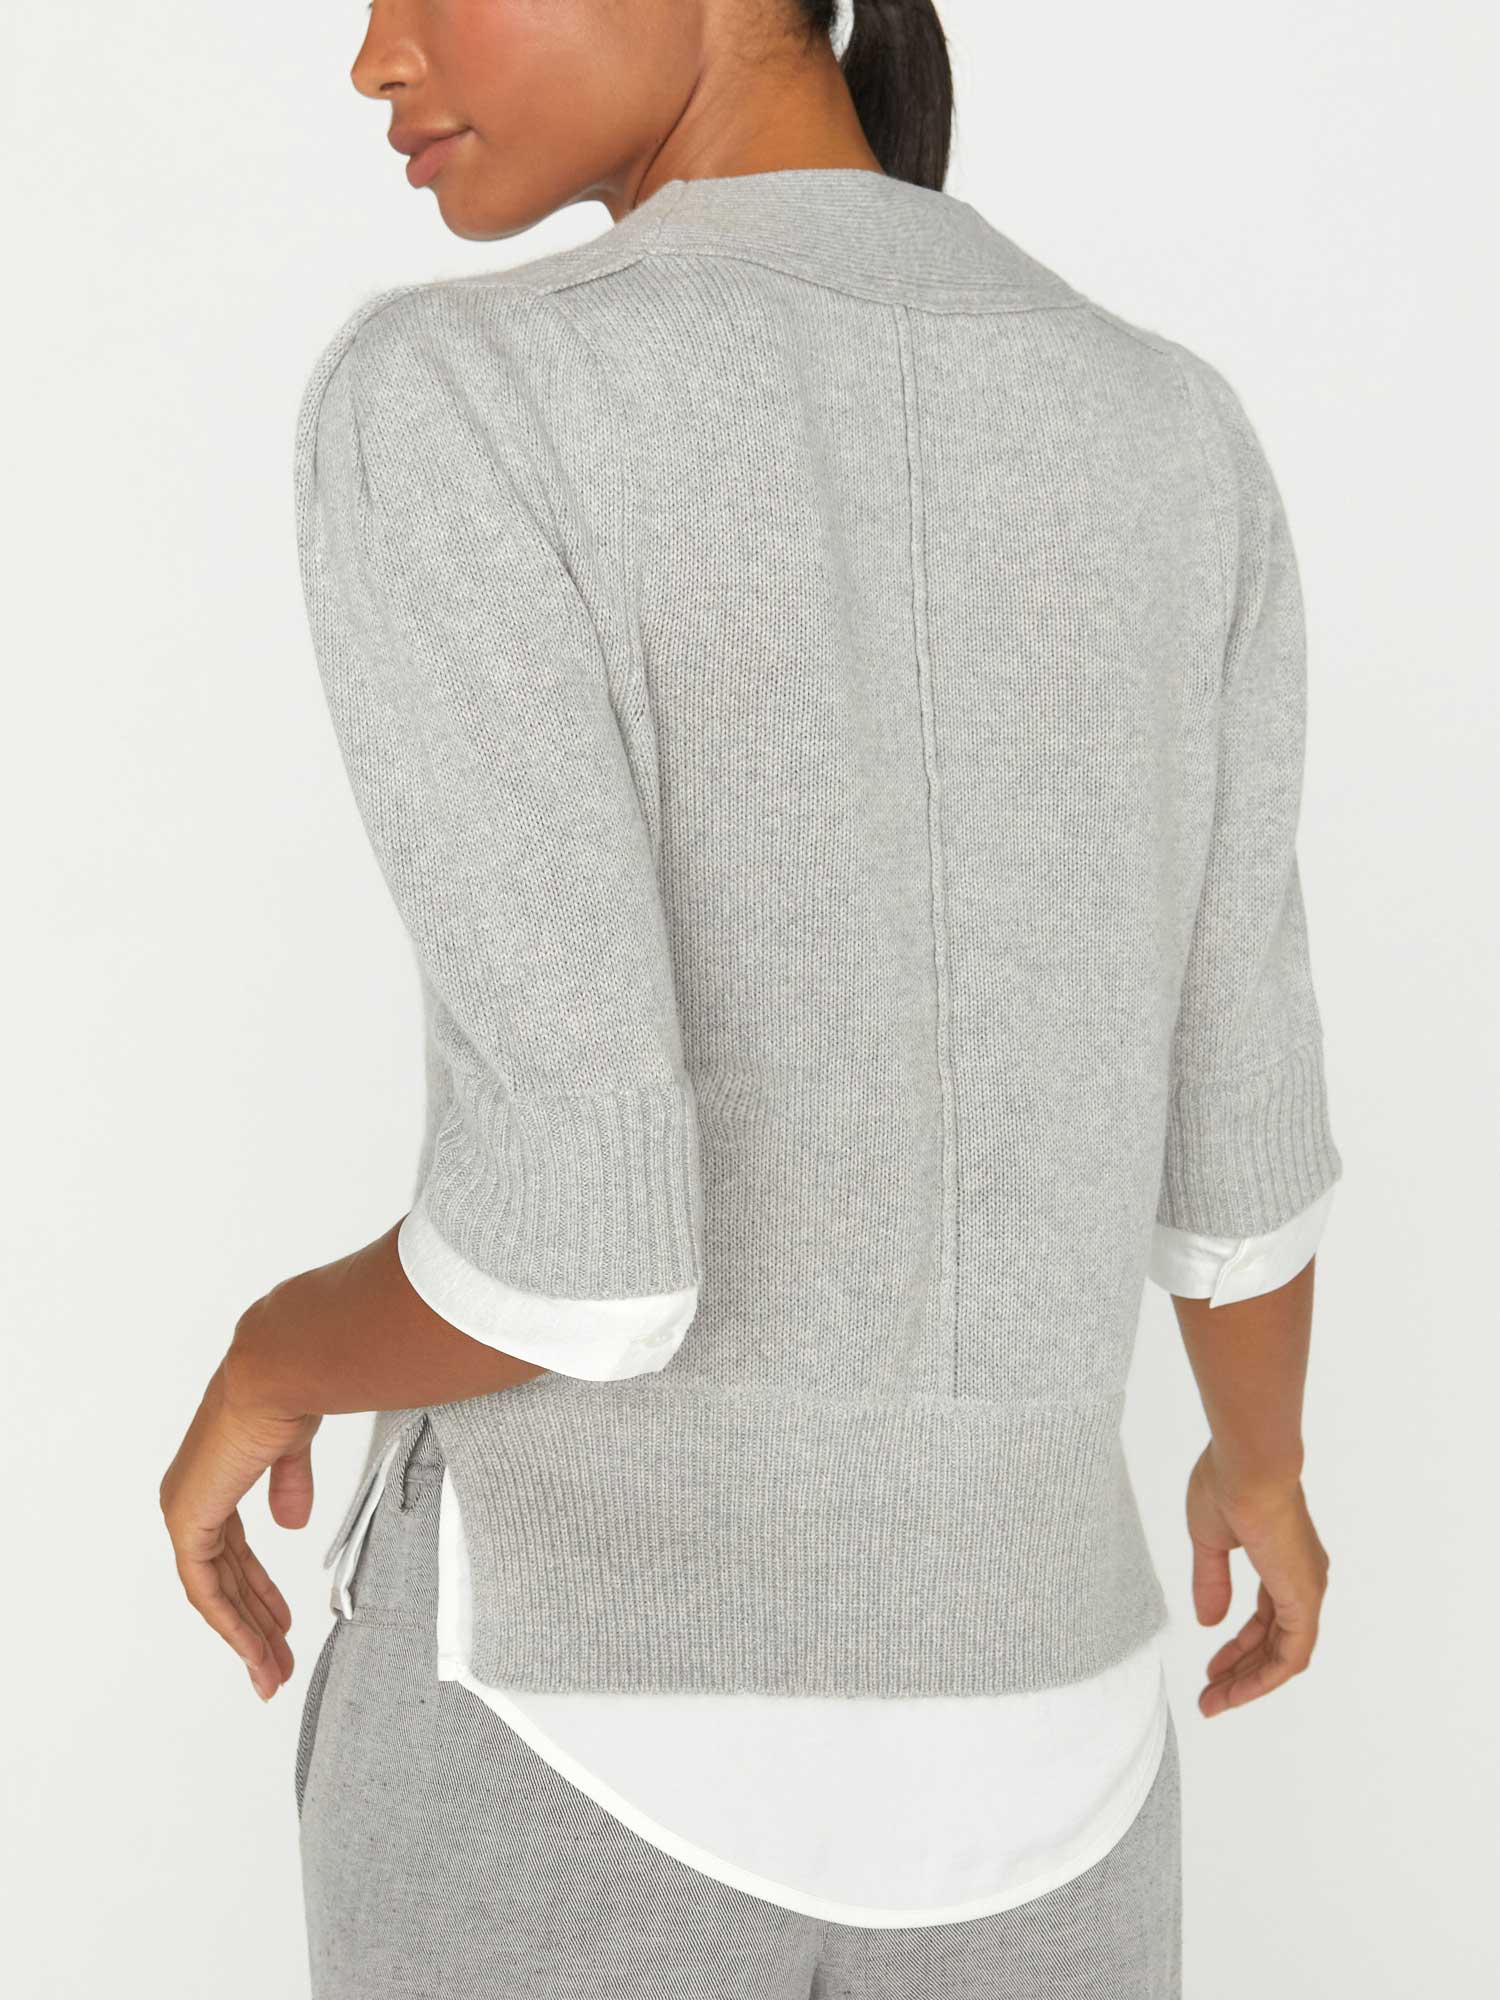 Lucie grey with white layered three-quarter sleeve v-neck sweater back view